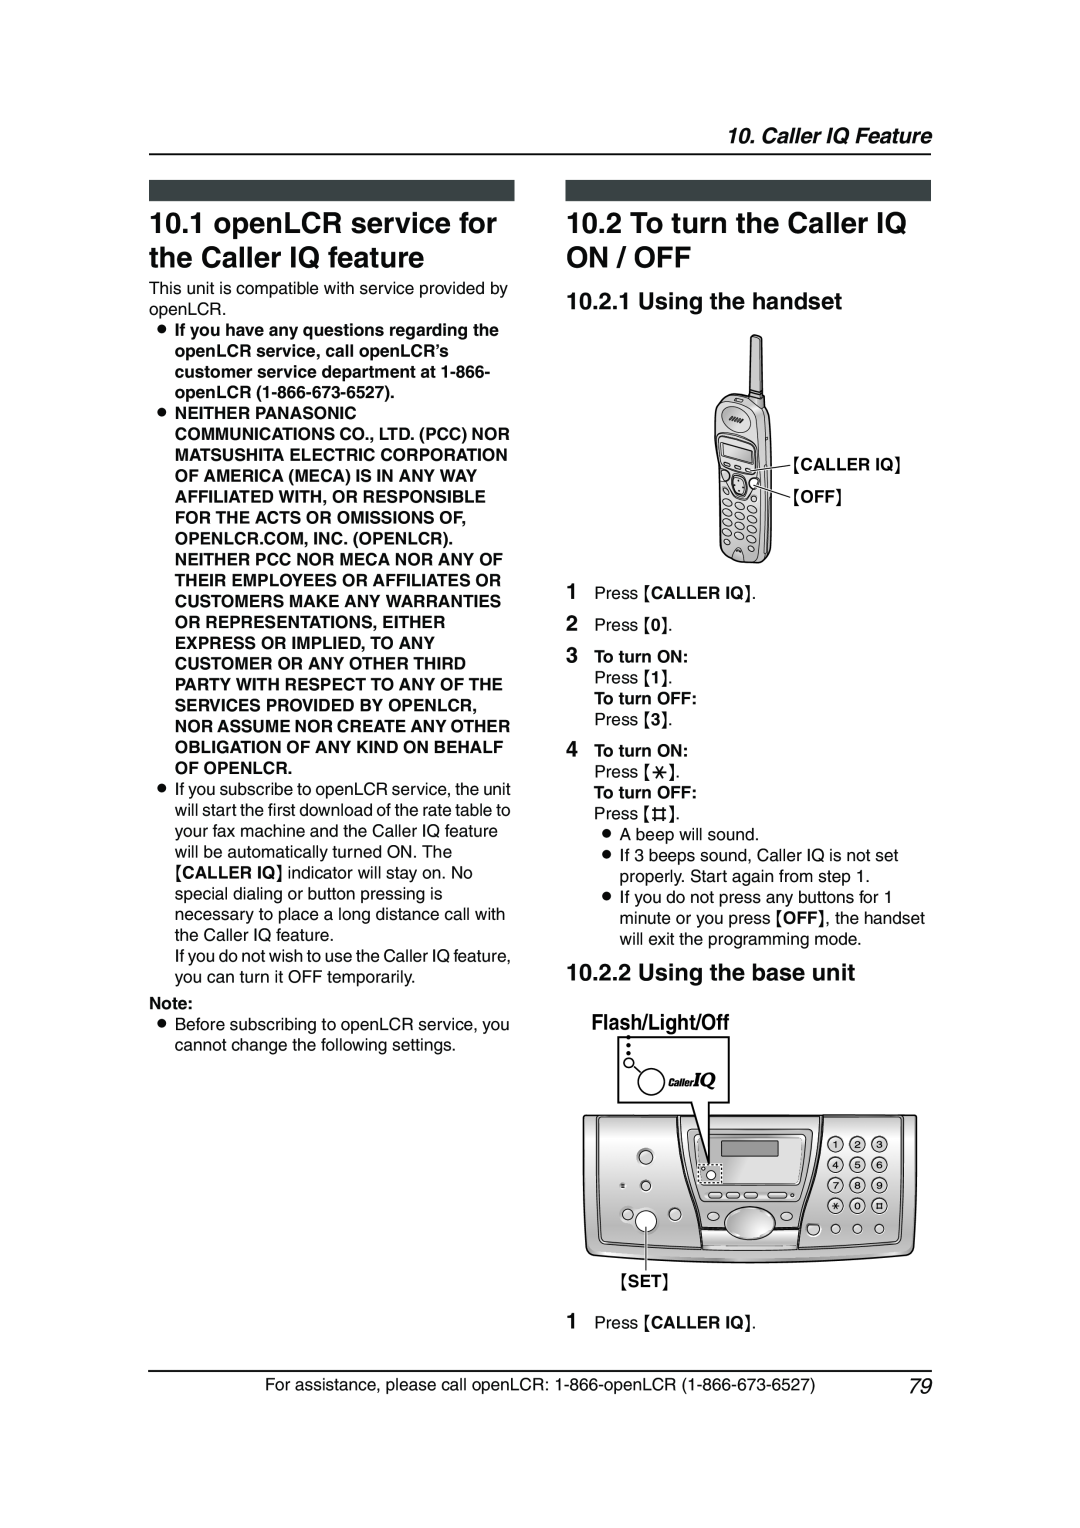 Panasonic KX-FPG377 manual openLCR service for the Caller IQ feature, To turn the Caller IQ ON / OFF, Using the handset 